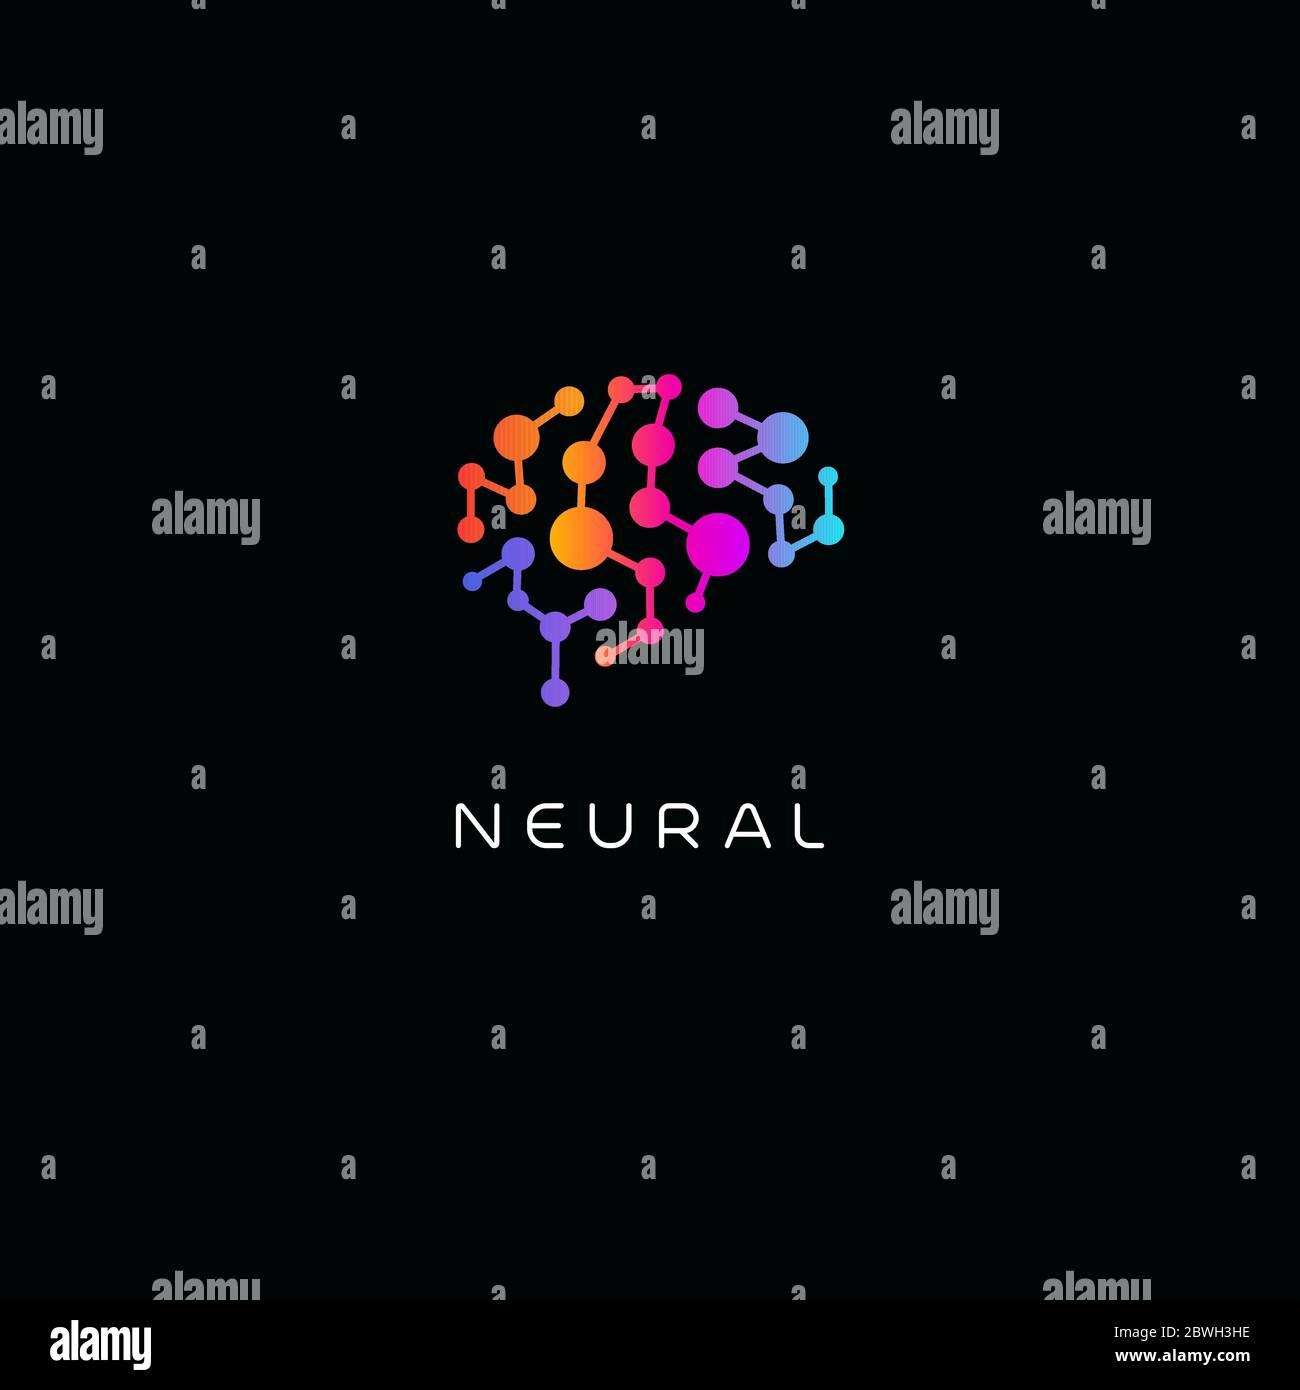 Neural network logo. Human brain emblem. Artificial intelligence icon. Creative thinking vector illustration. Isolated science innovation sign Stock Vector